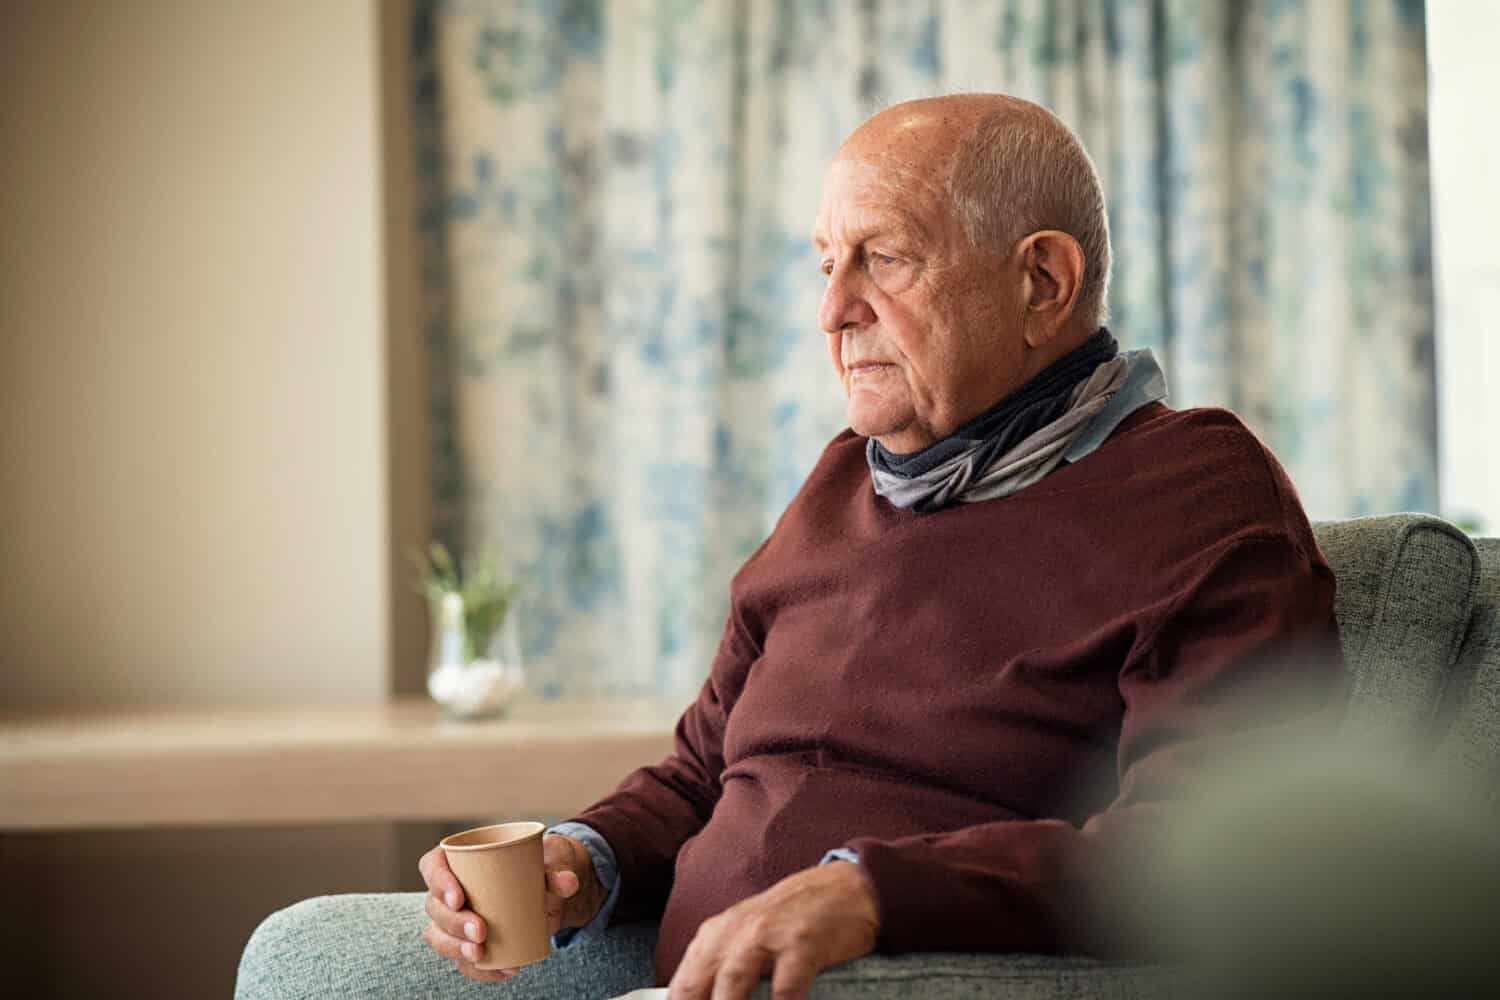 Depressed senior man sitting on armchair holding disposable cup of coffee and thinking. Frustrated retired man sitting on sofa. Sad mature man sitting alone at nursing home with sad expression.